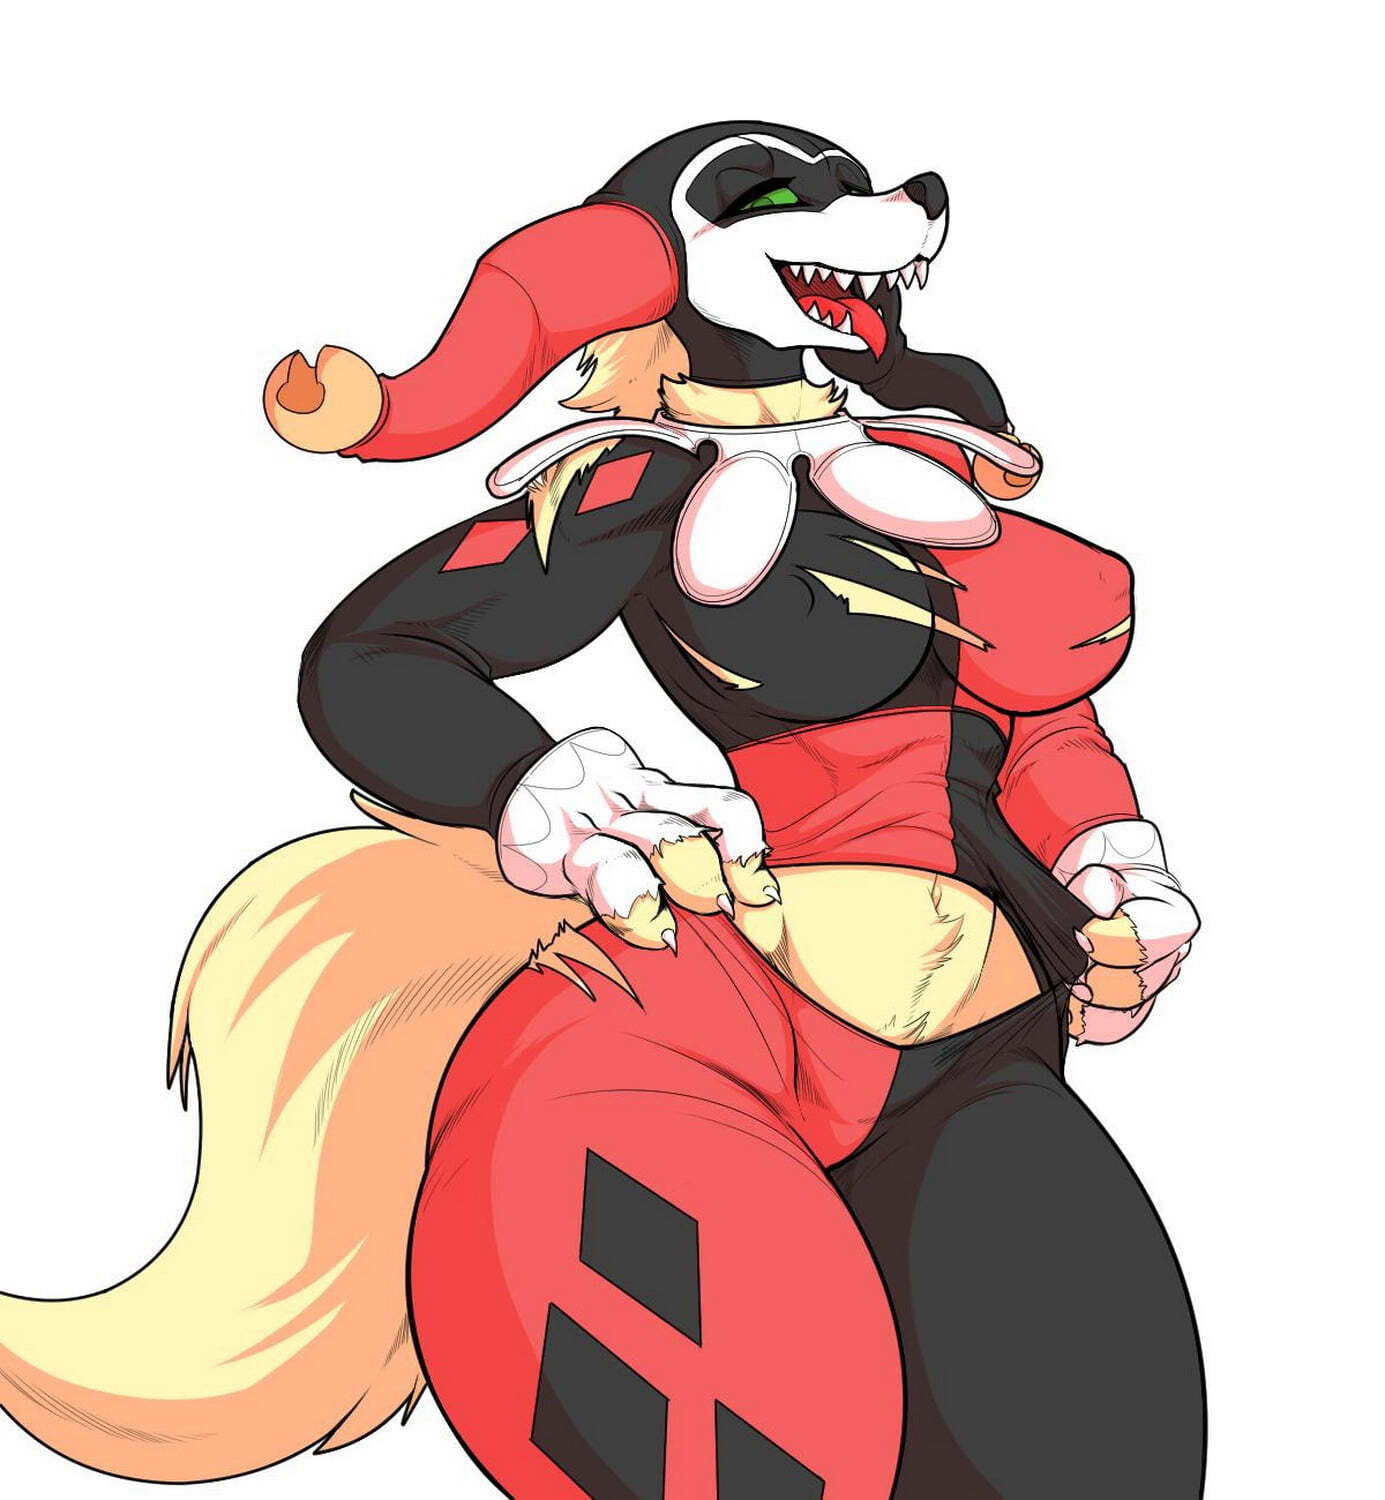 Furry Female Porn Only - Harley Quinn Female Only Big Breast Blonde Tits Furry > Your Cartoon Porn